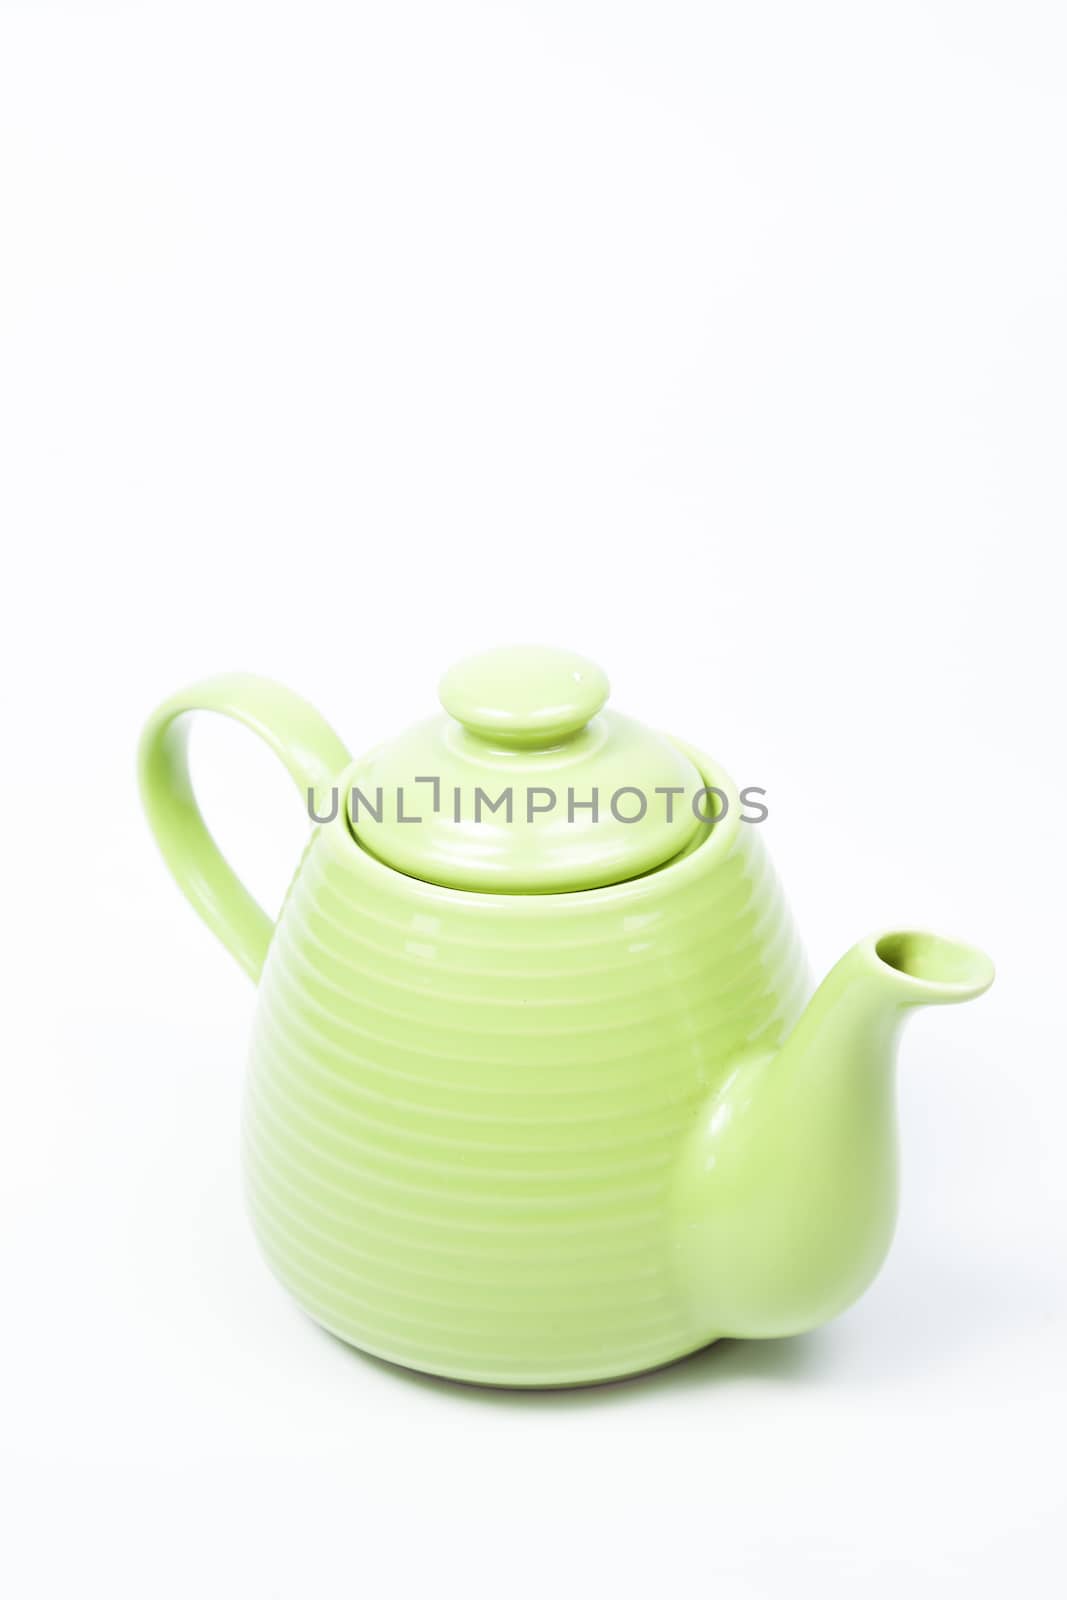 Green teapot on a white background with a single in the studio.